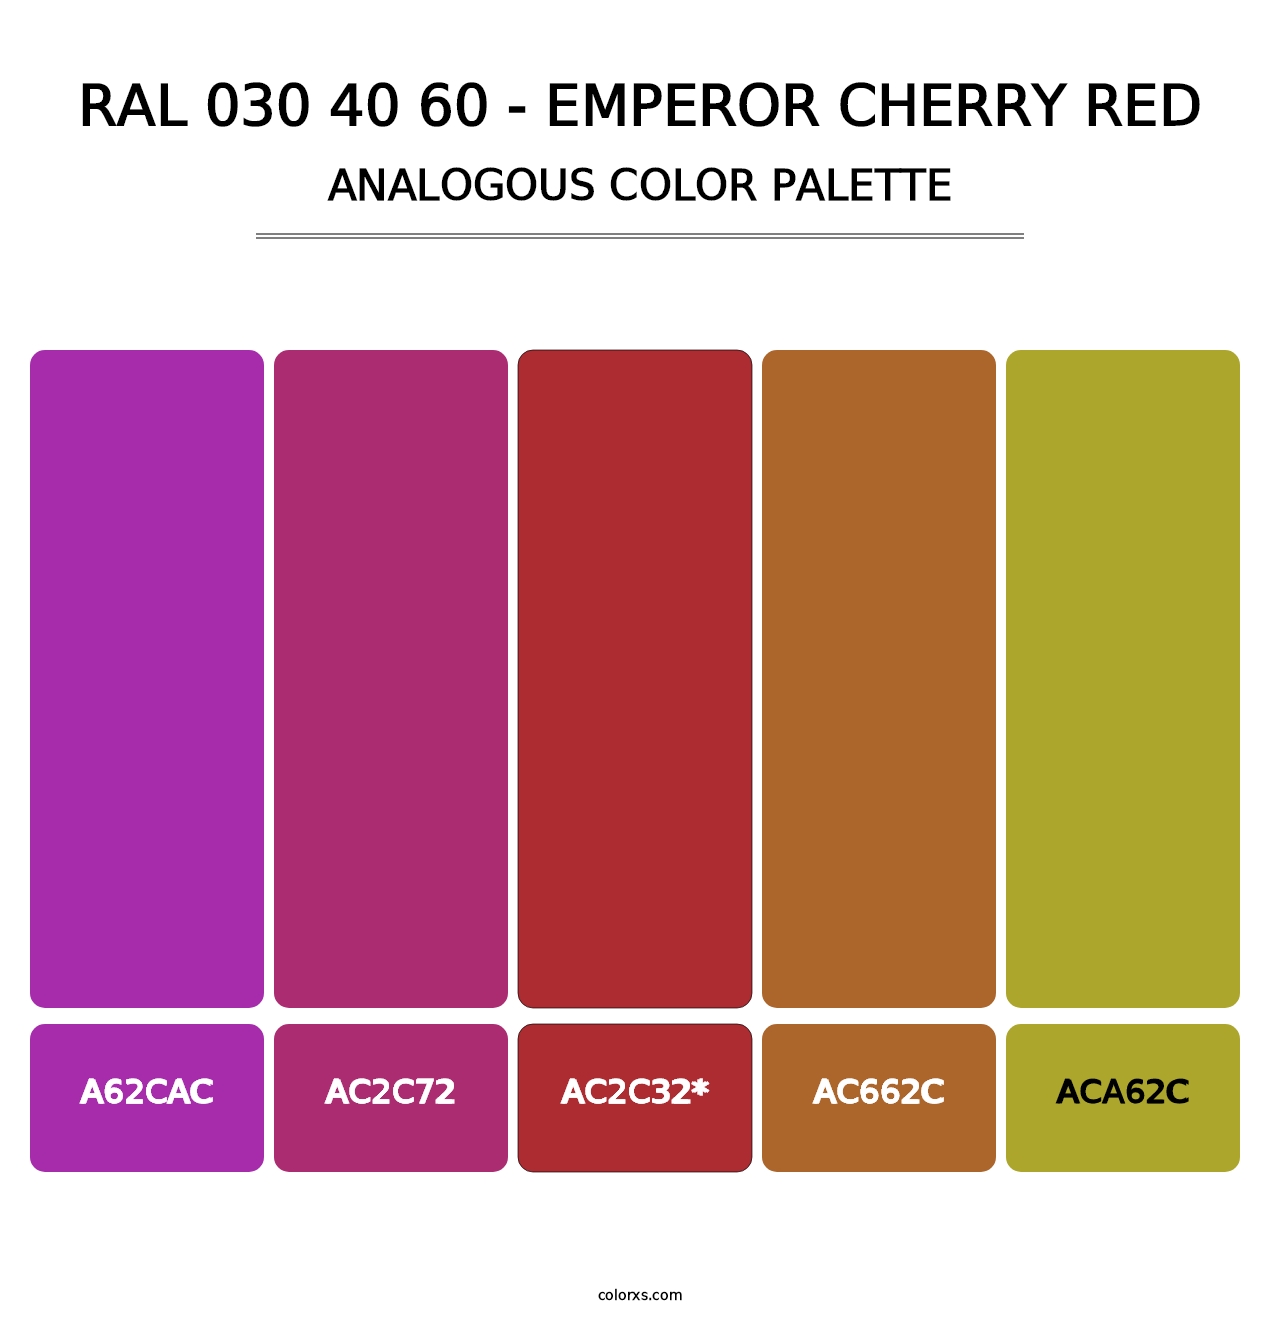 RAL 030 40 60 - Emperor Cherry Red - Analogous Color Palette